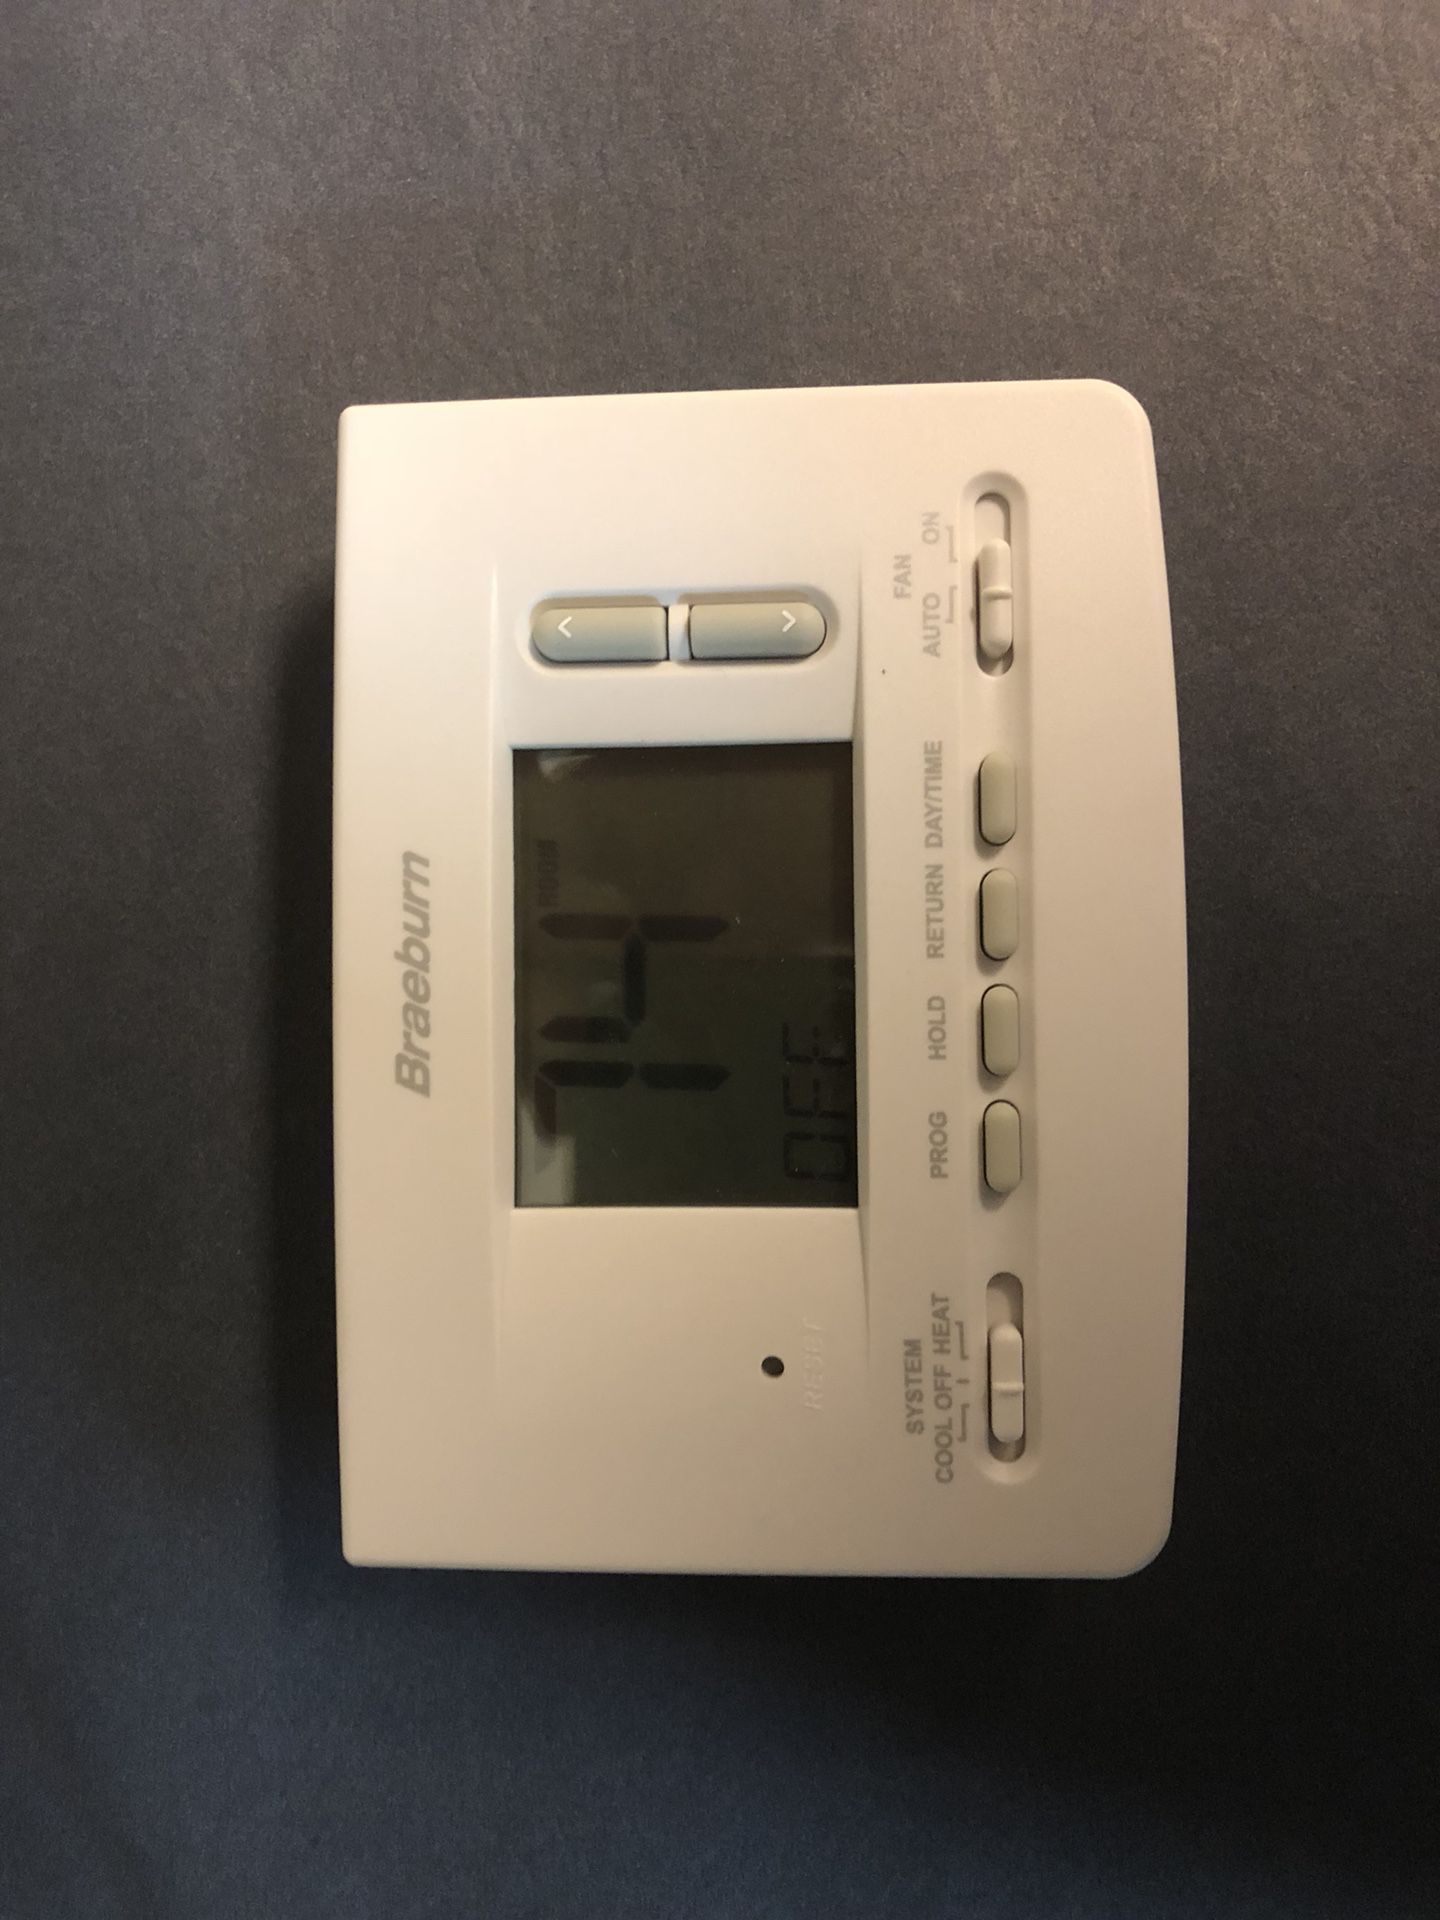 Programmable Home Thermostat